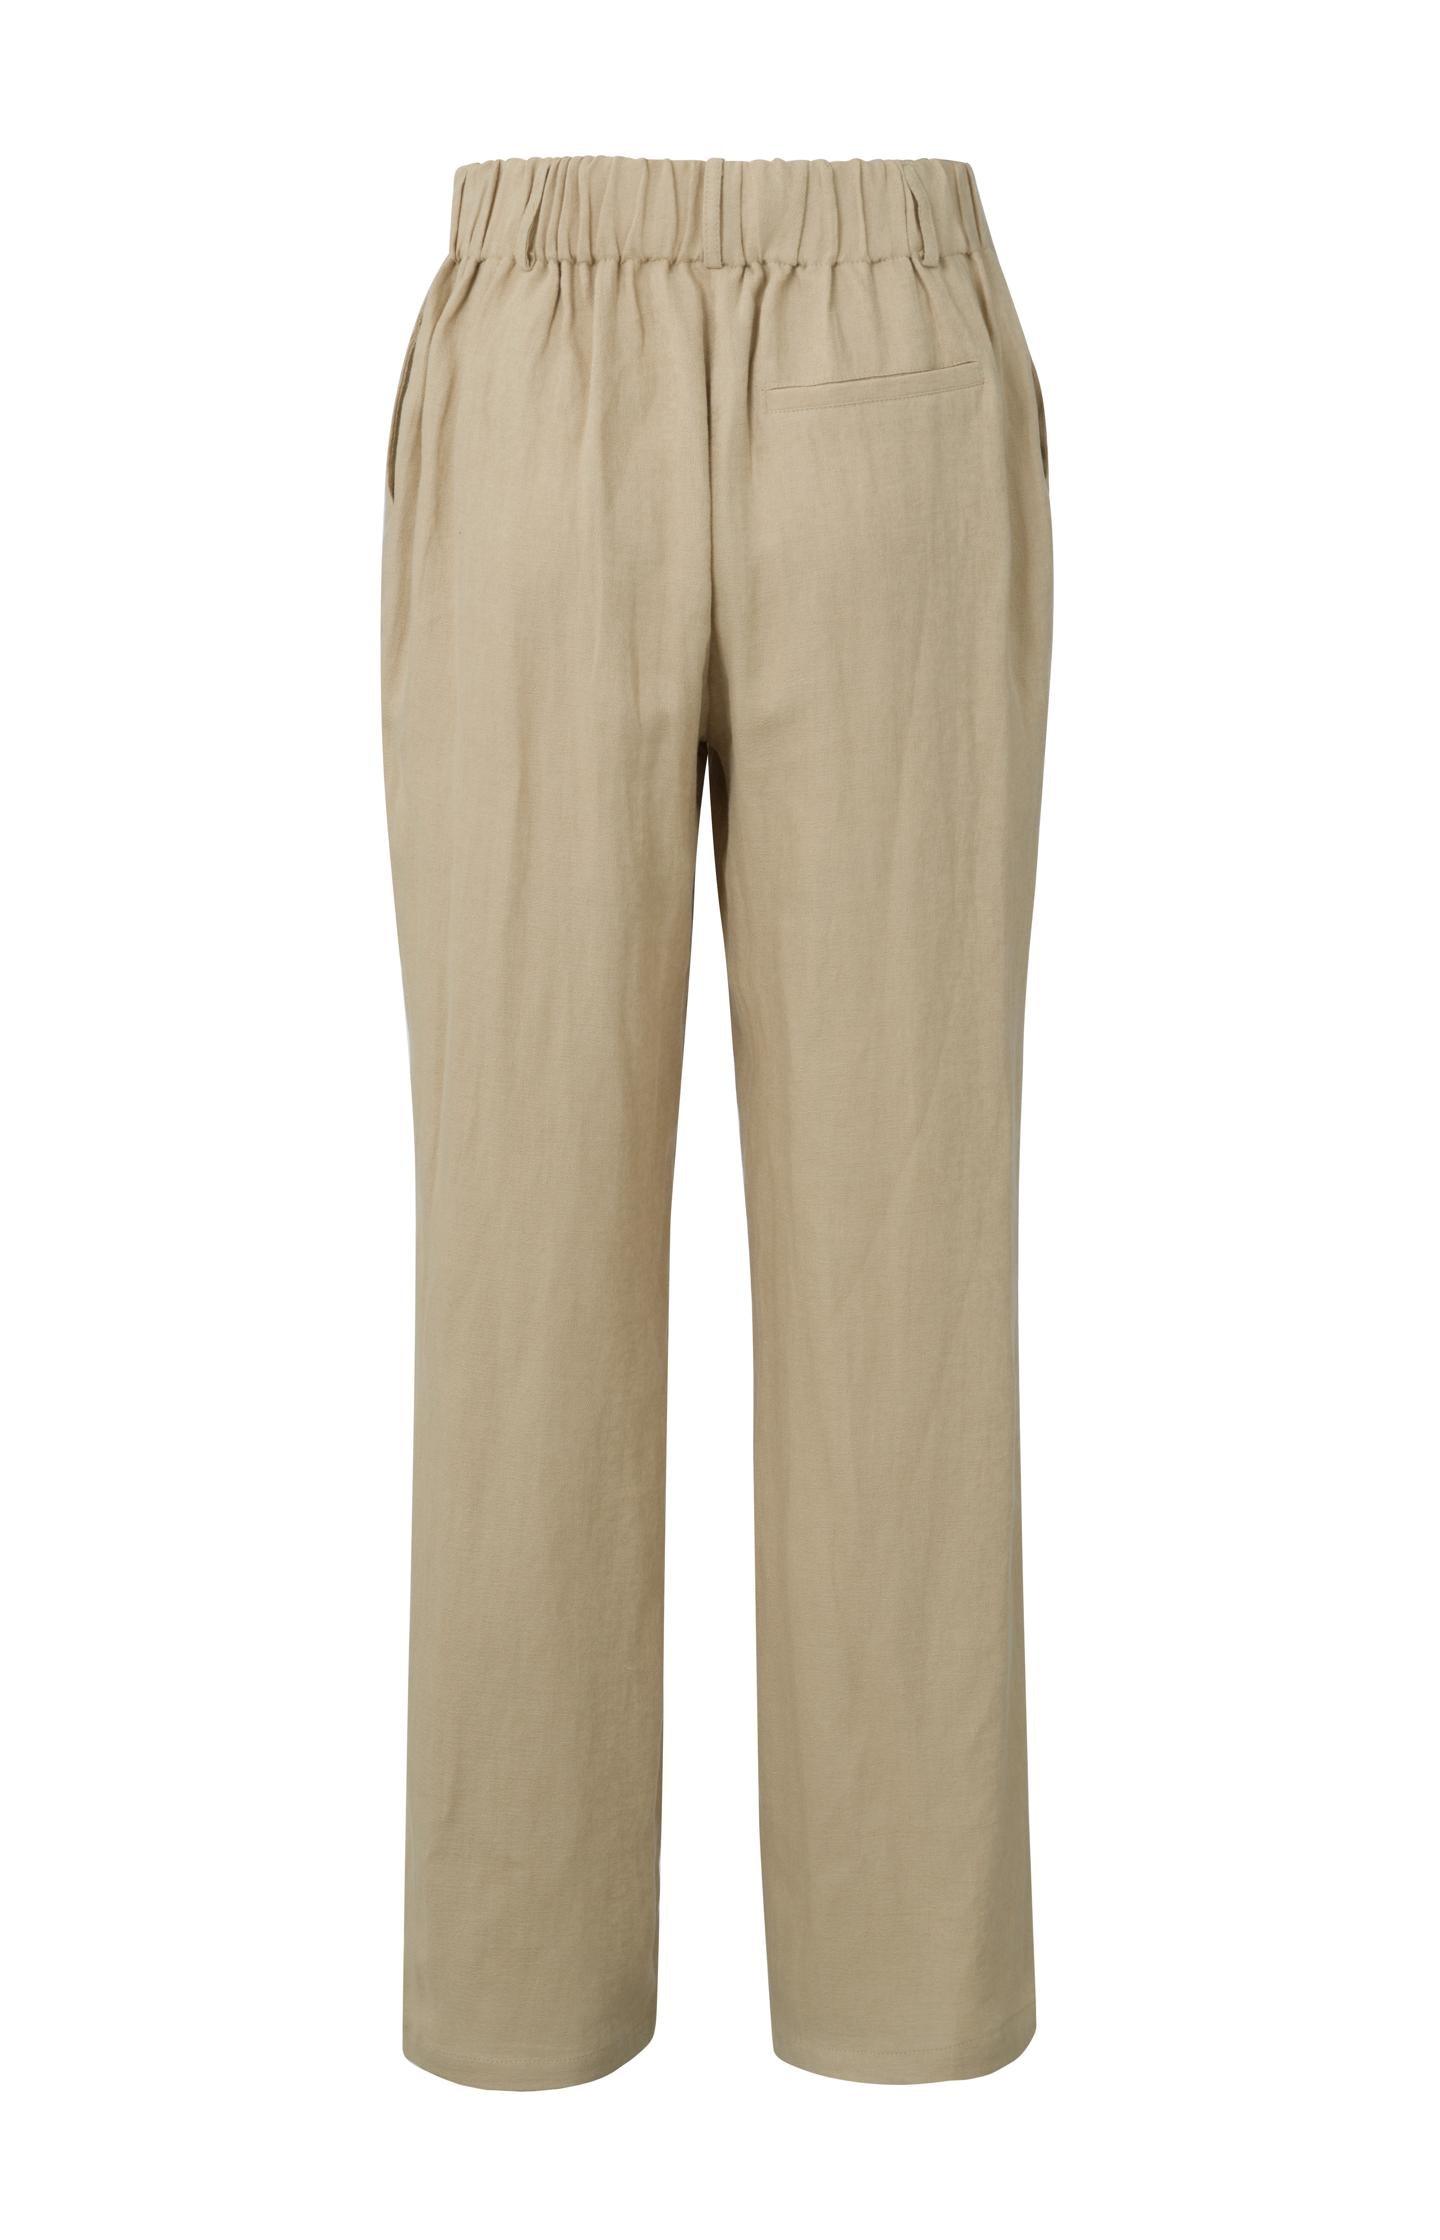 Trousers with buttons, side pockets and elastic waist